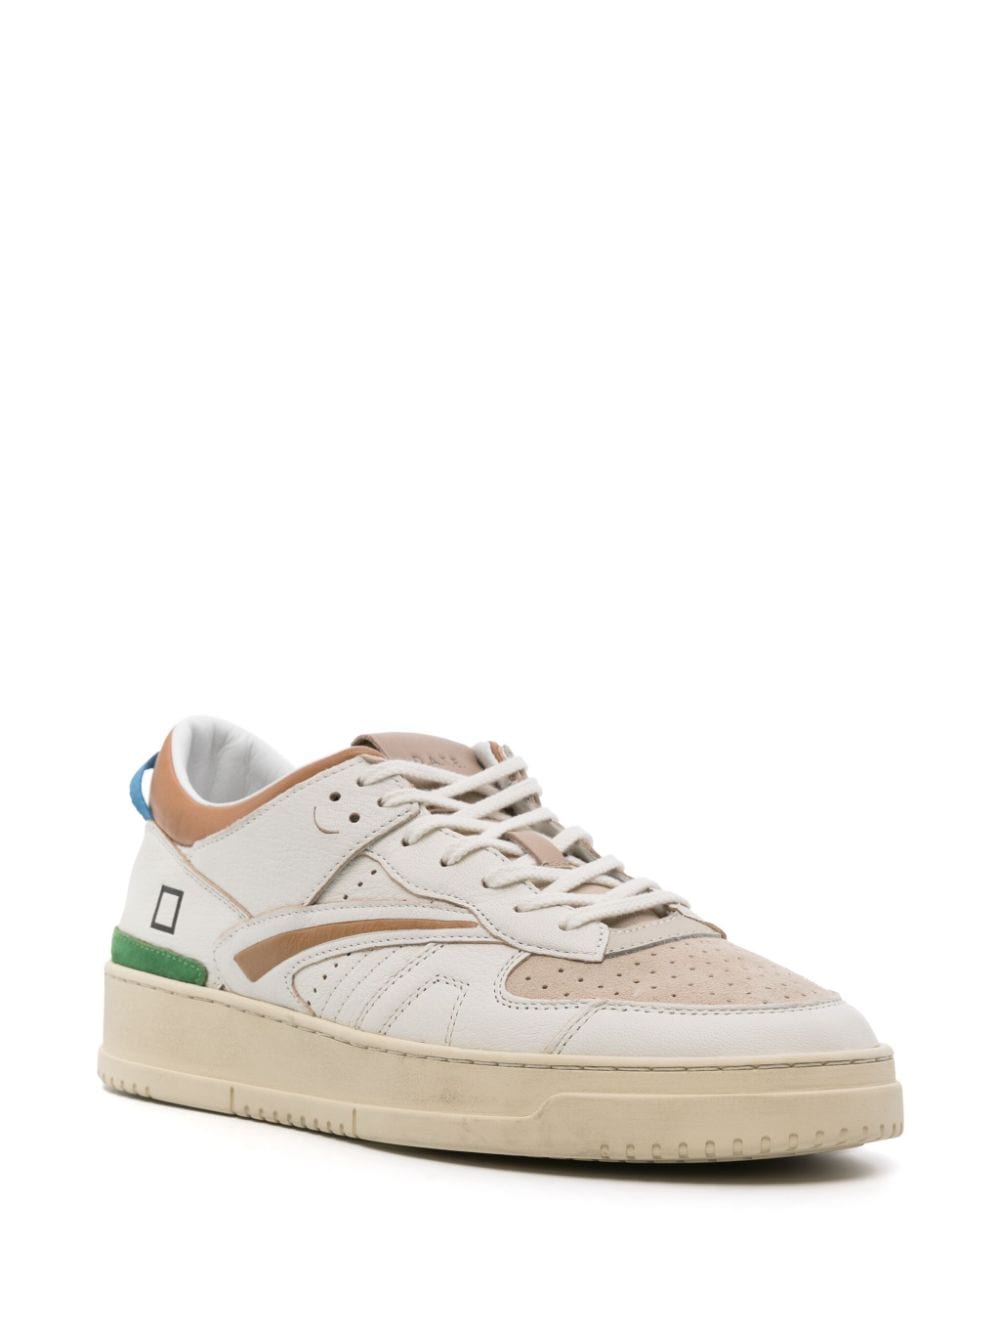 Image 2 of D.A.T.E. Torneo leather sneakers